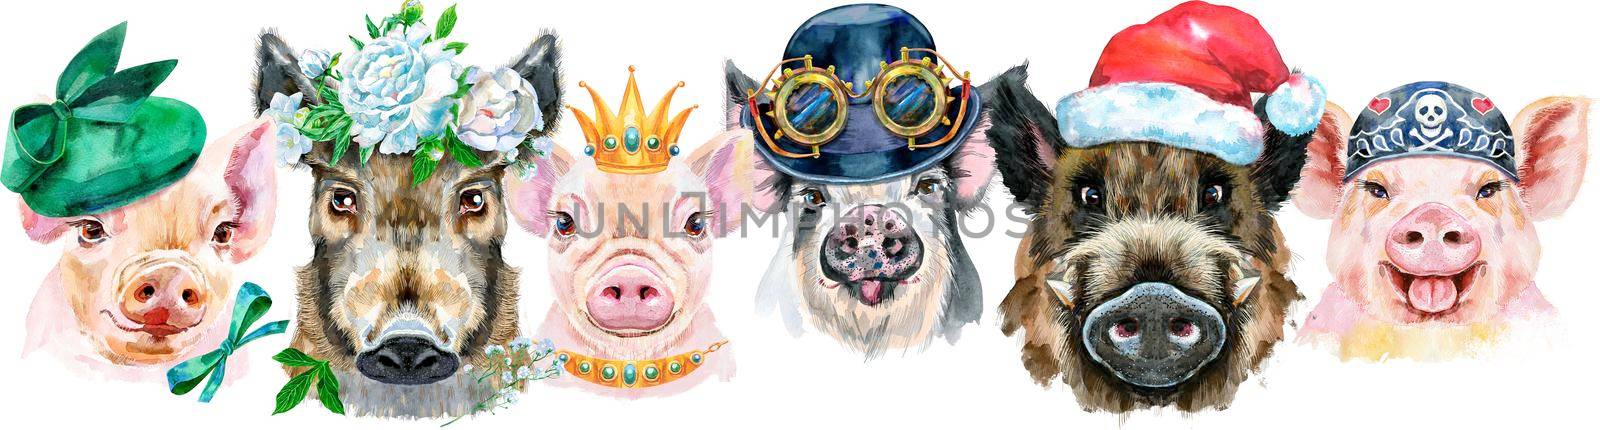 Cute border from watercolor portraits of pigs. Watercolor illustration of pigs in wreath of peonies, Santa hat, golden crown, bandana and bowler with steampunk glasses